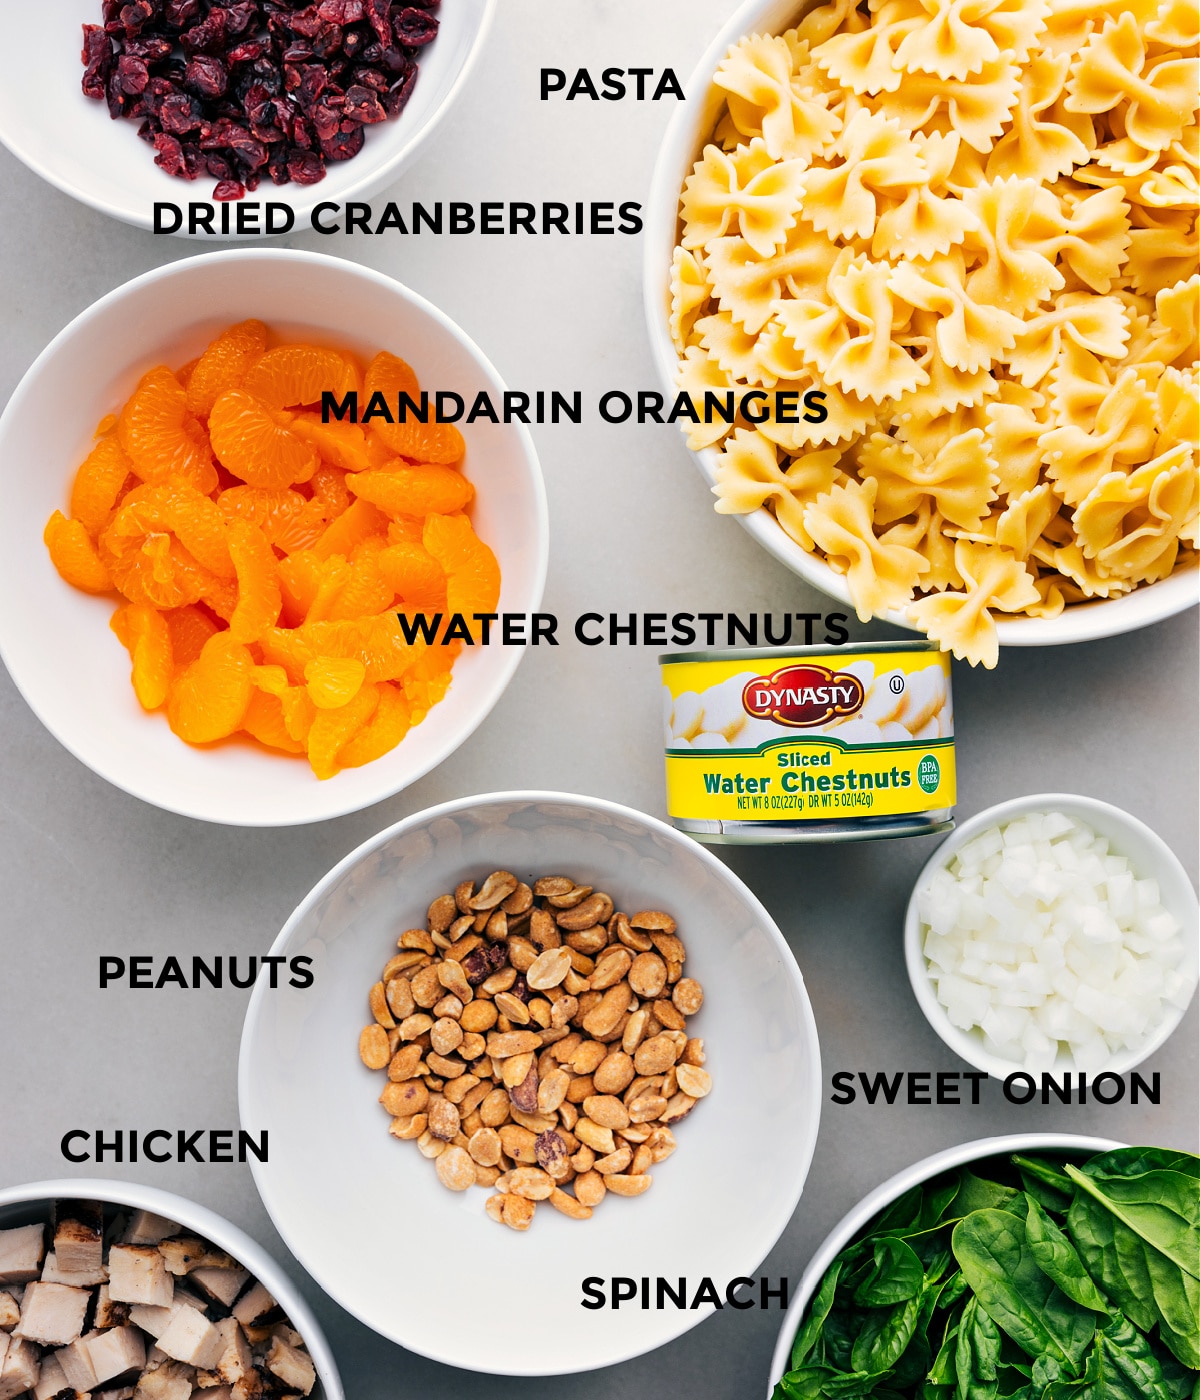 Ingredients including dried cranberries, pasta, water chestnuts, oranges, onion, spinach, peanuts, and chicken prepped out for easy assembly.